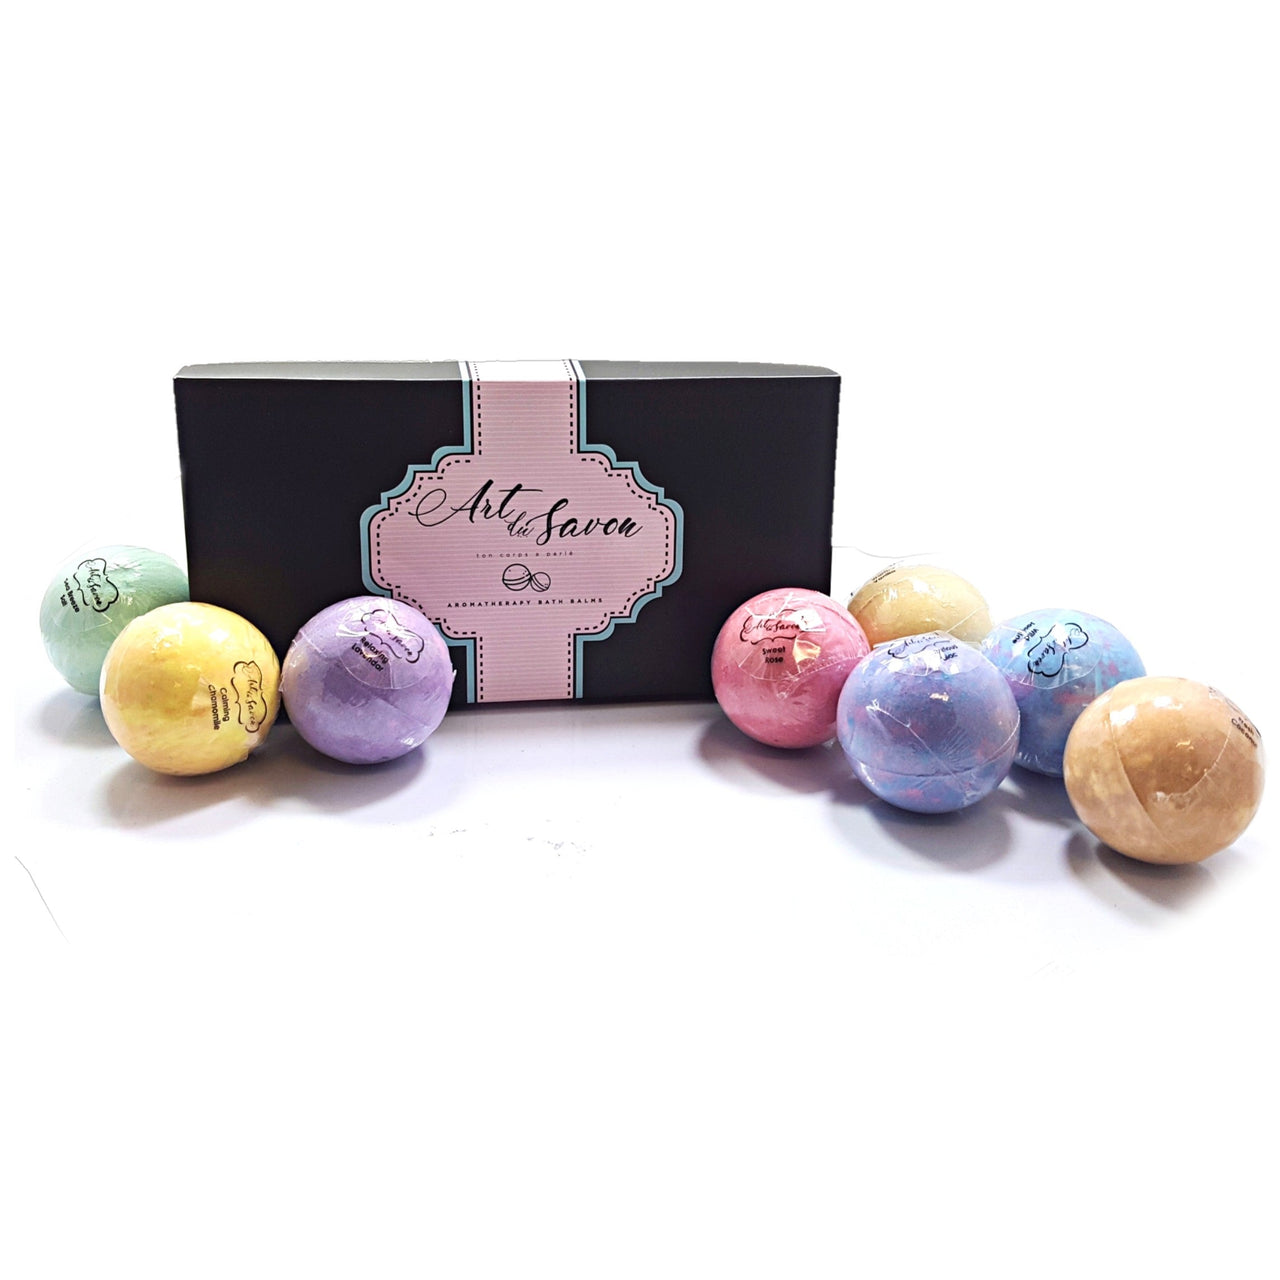 8pc Bath Bomb Luxury Gift Set Uplifting Fragrances Soothes Body and Mind Conditioning Skin with Shea Butter